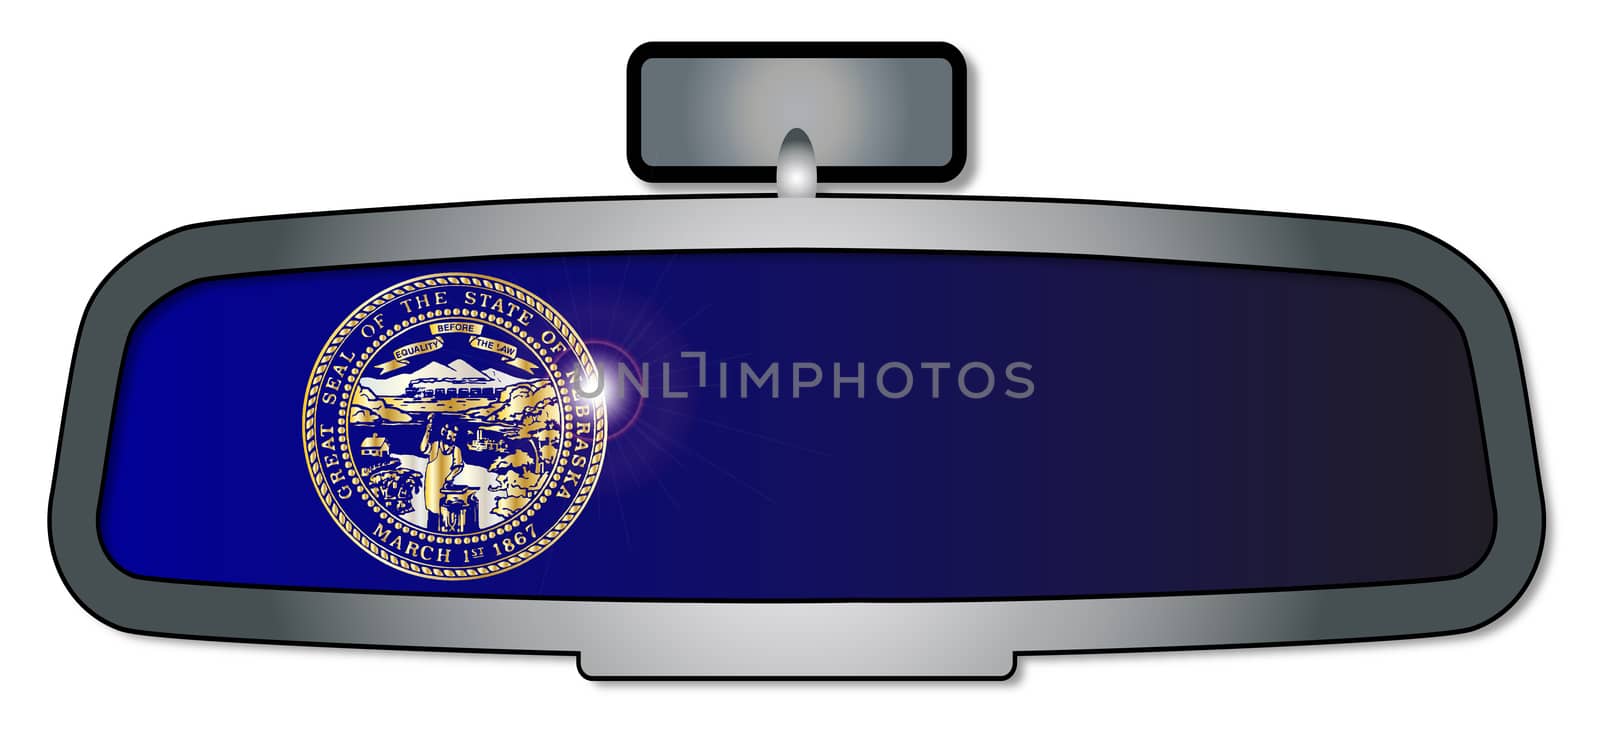 A vehicle rear view mirror with the flag of the state of Nebraska